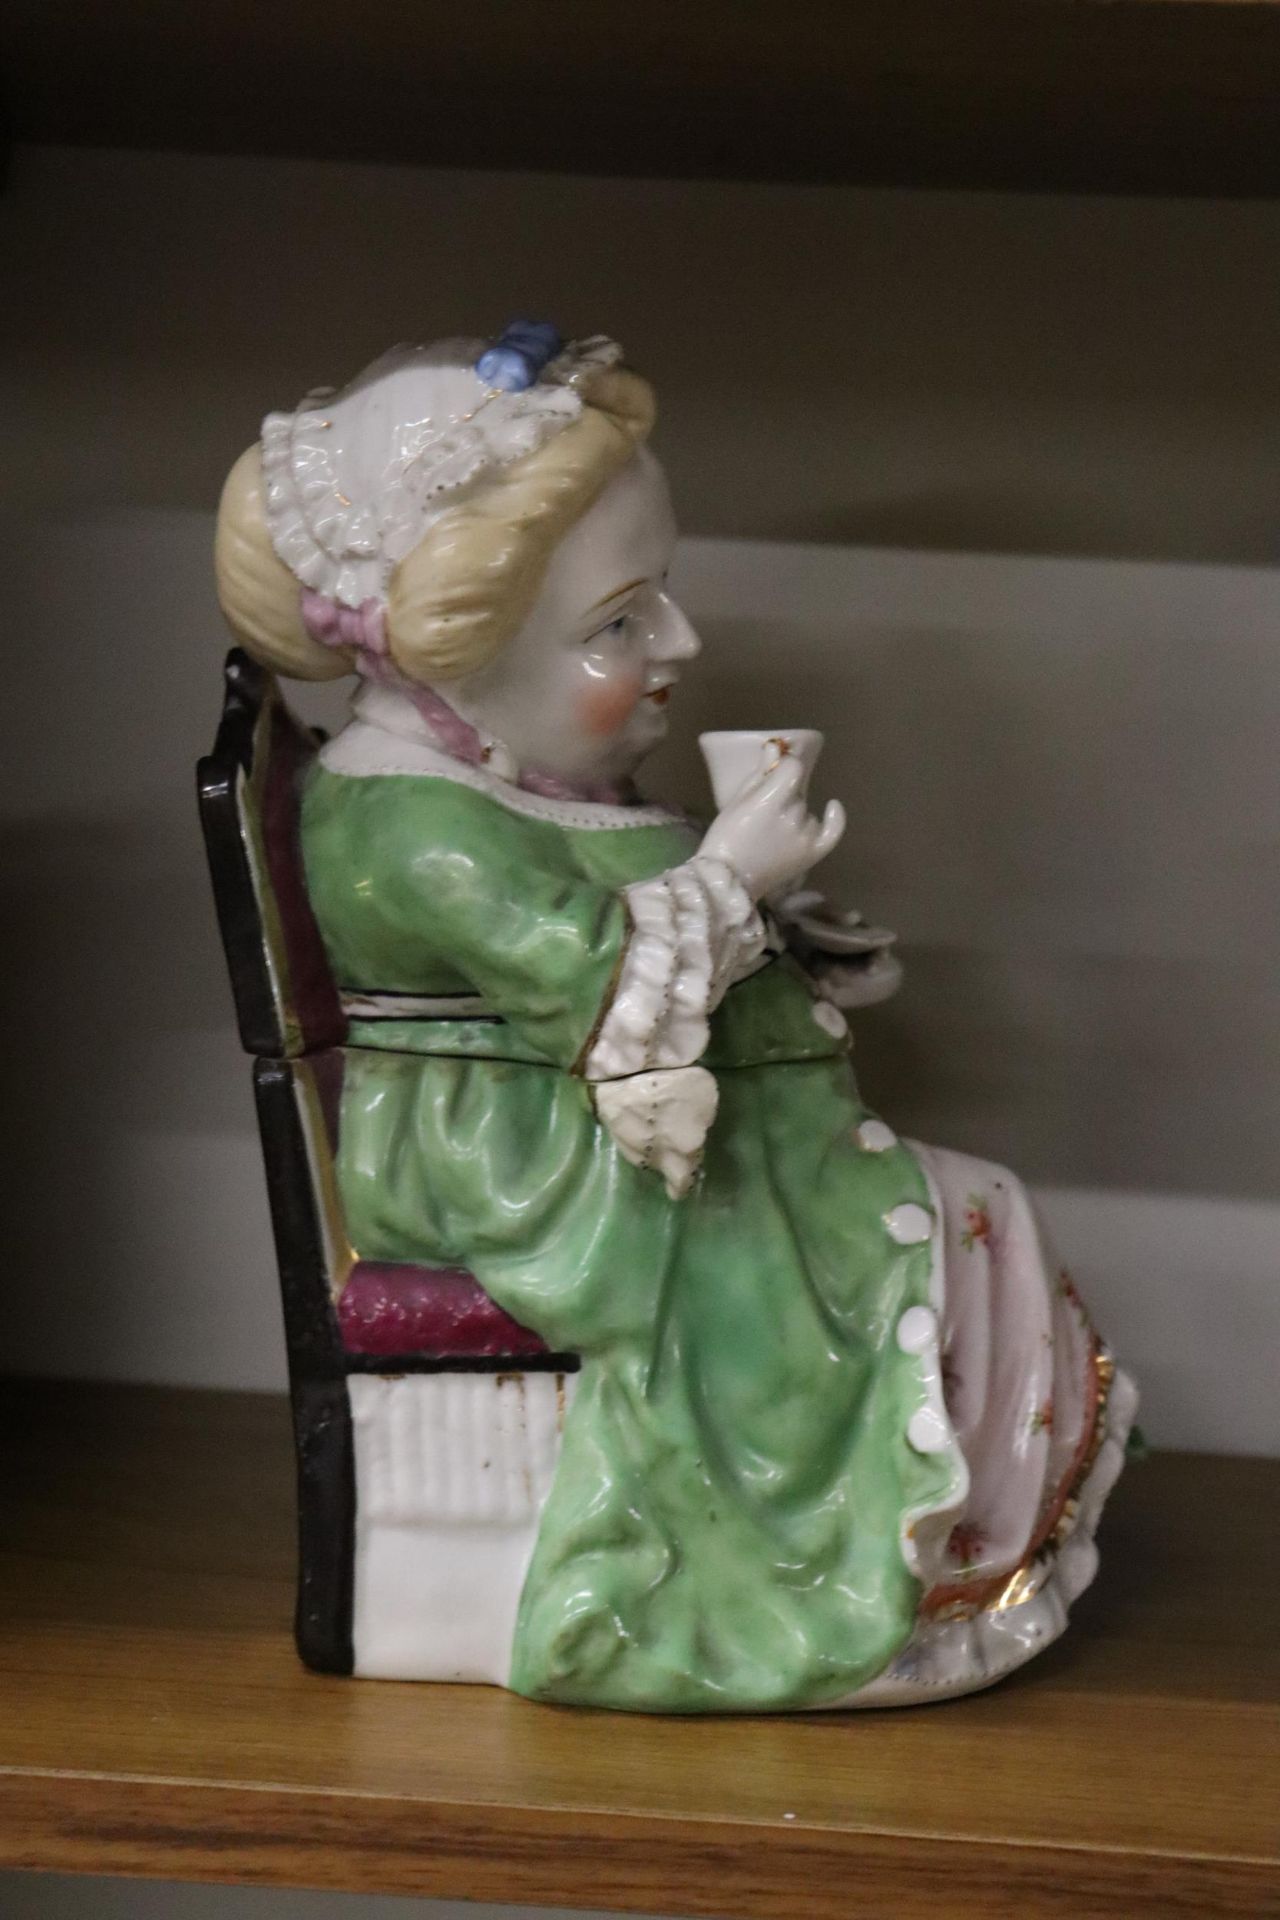 TWO VINTAGE ORIGINAL GERMAN TOBACCO JARS, A MAN AND A LADY WITH A CUP OF TEA, GOOD COLOURS, JOHN - Image 10 of 11